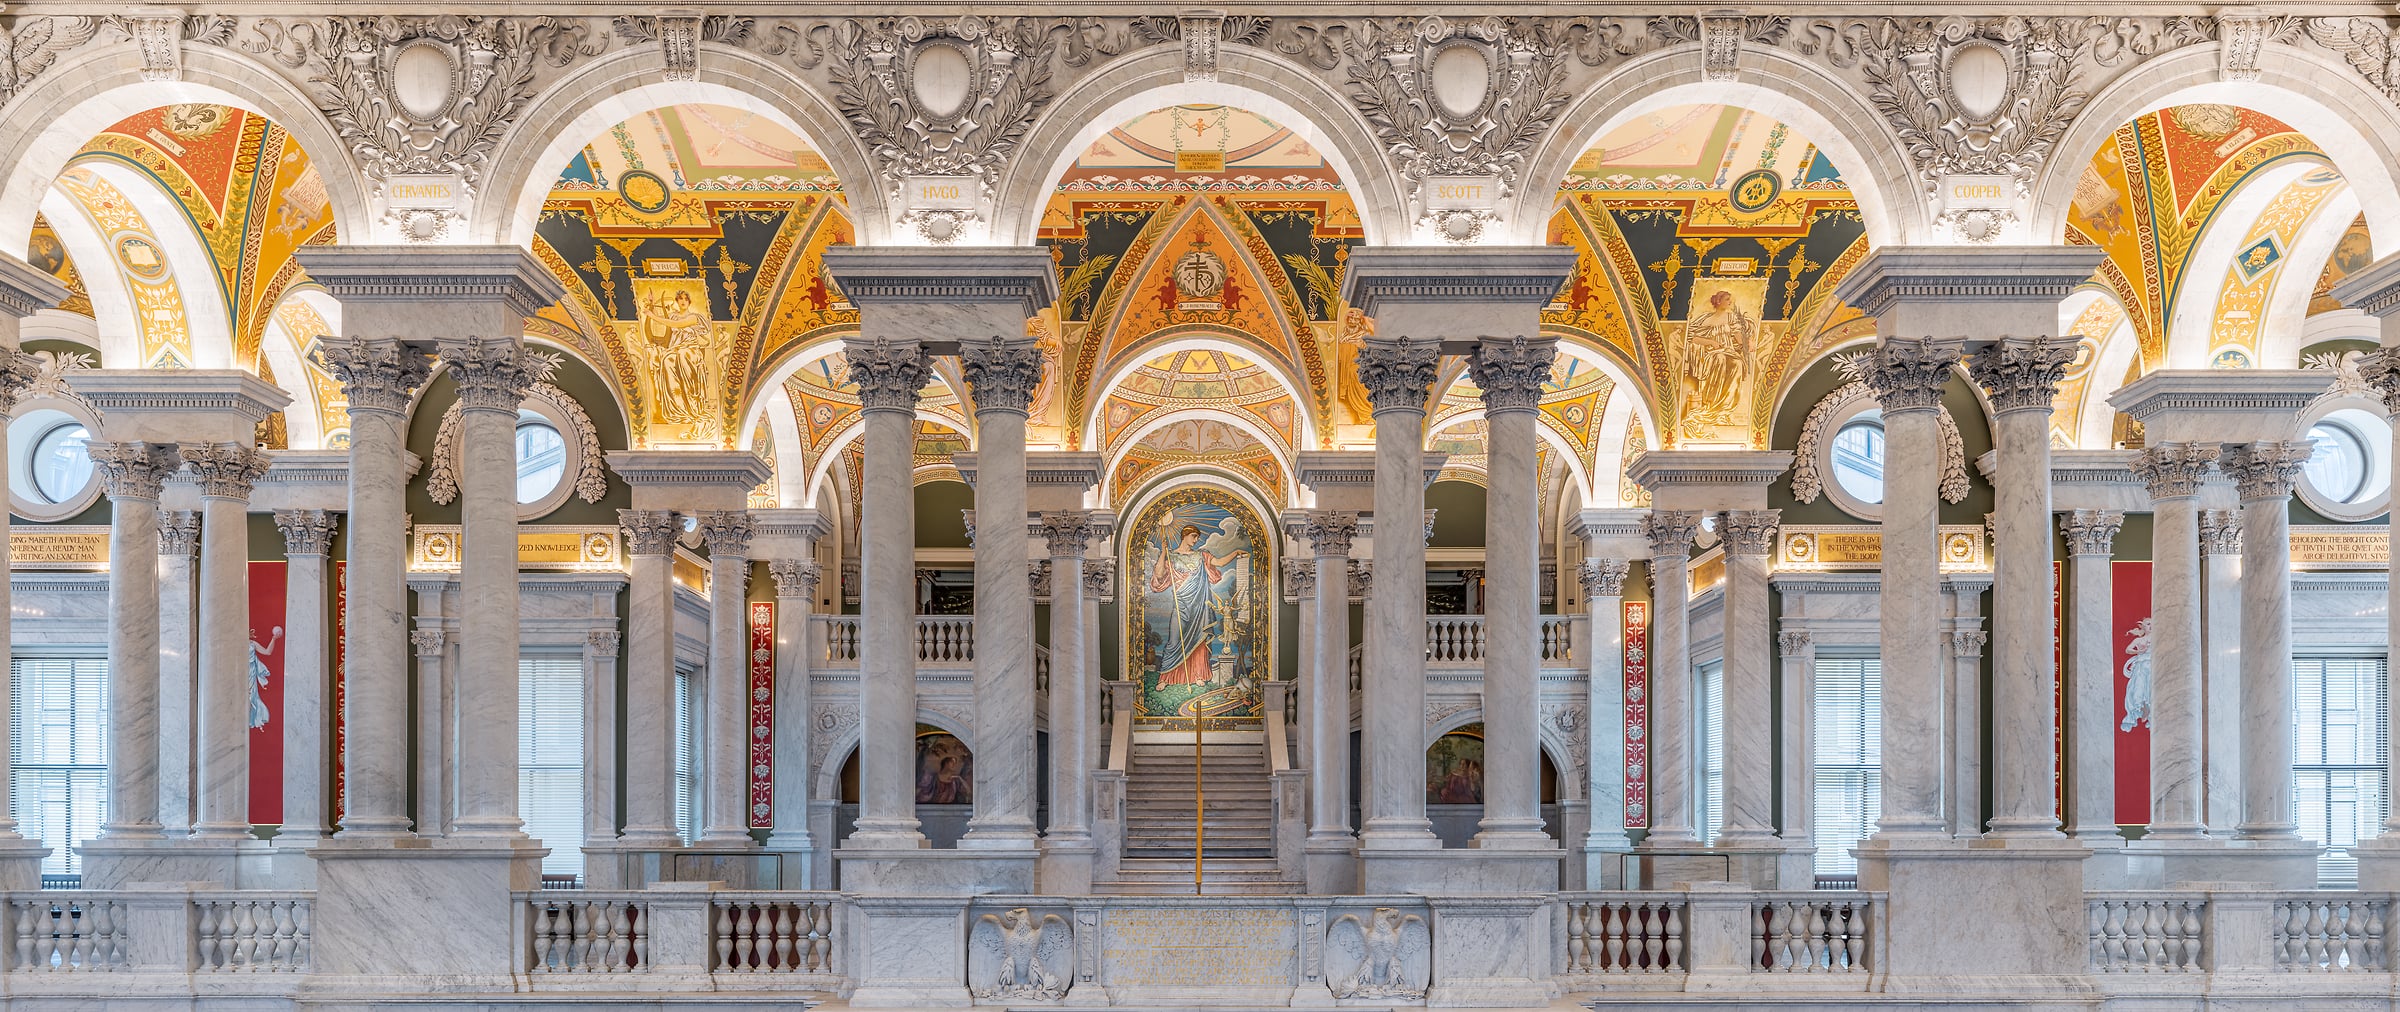 276 megapixels! A very high resolution, large-format VAST photo print of an ornate interior; architecture photograph created by Tim Lo Monaco in the Thomas Jefferson Building of the Library of Congress on Capitol Hill in Washington, D.C.